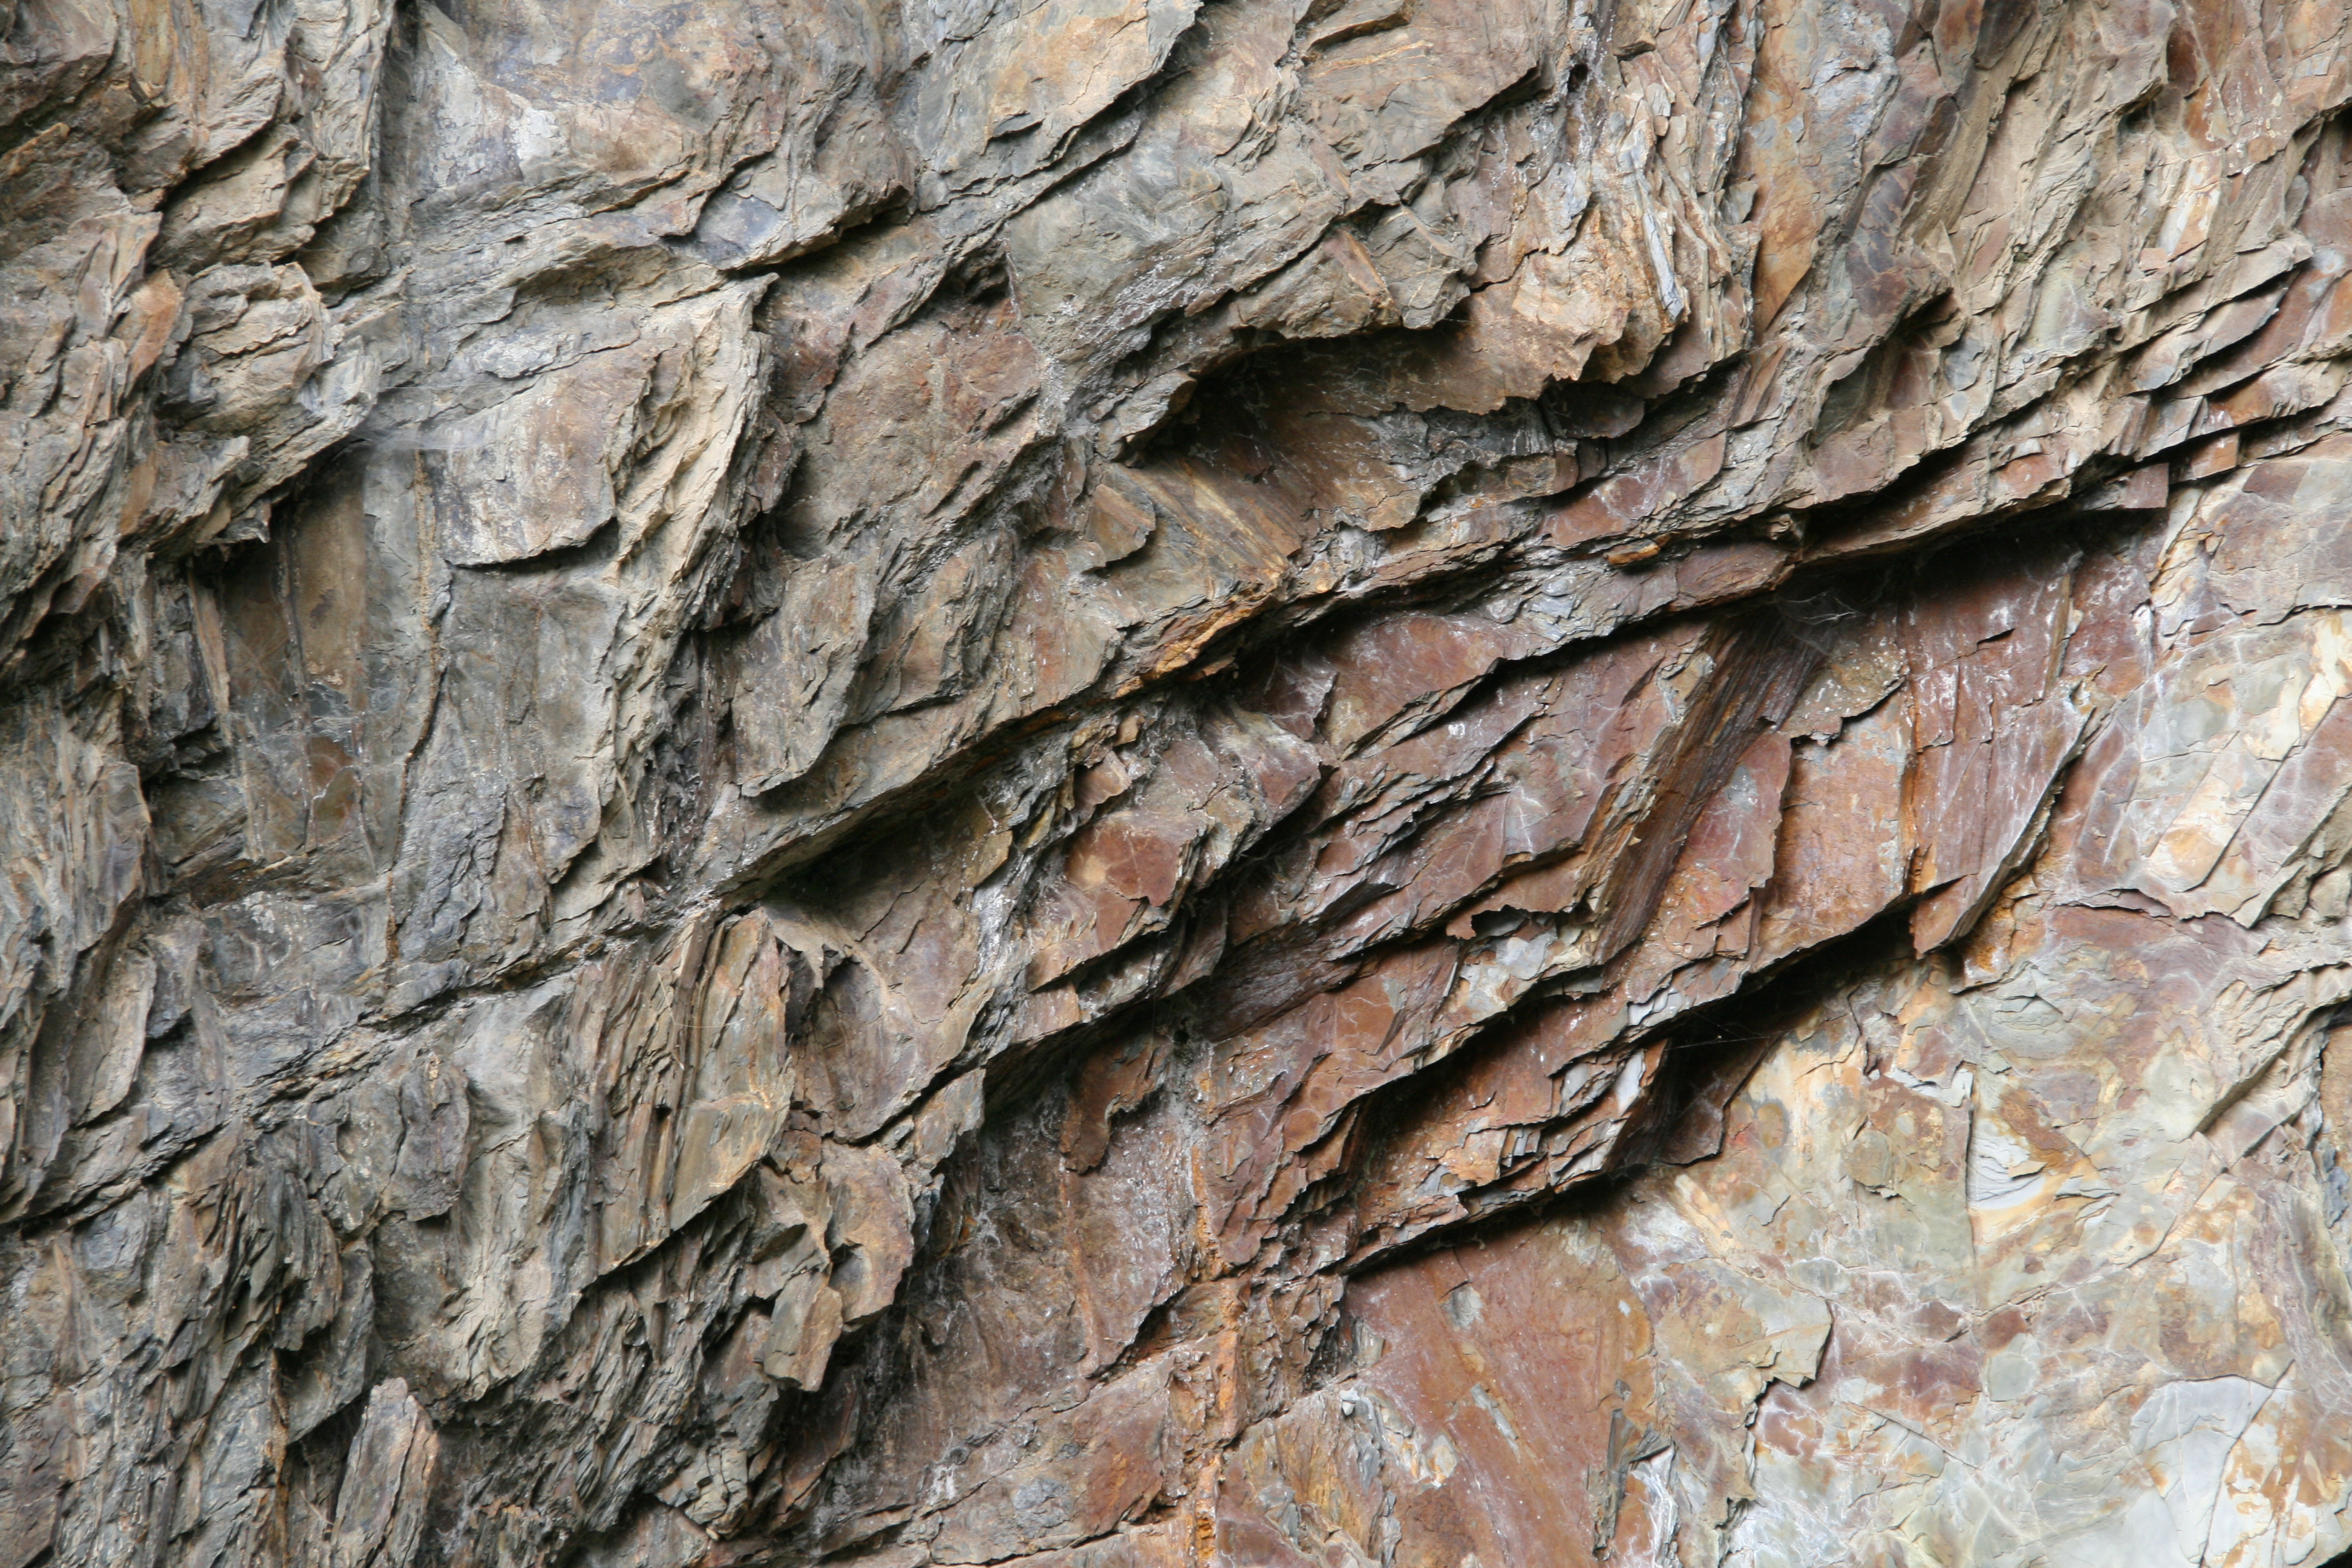 High Quality Chipped Rock Textures - Rock Textures | High Quality ...